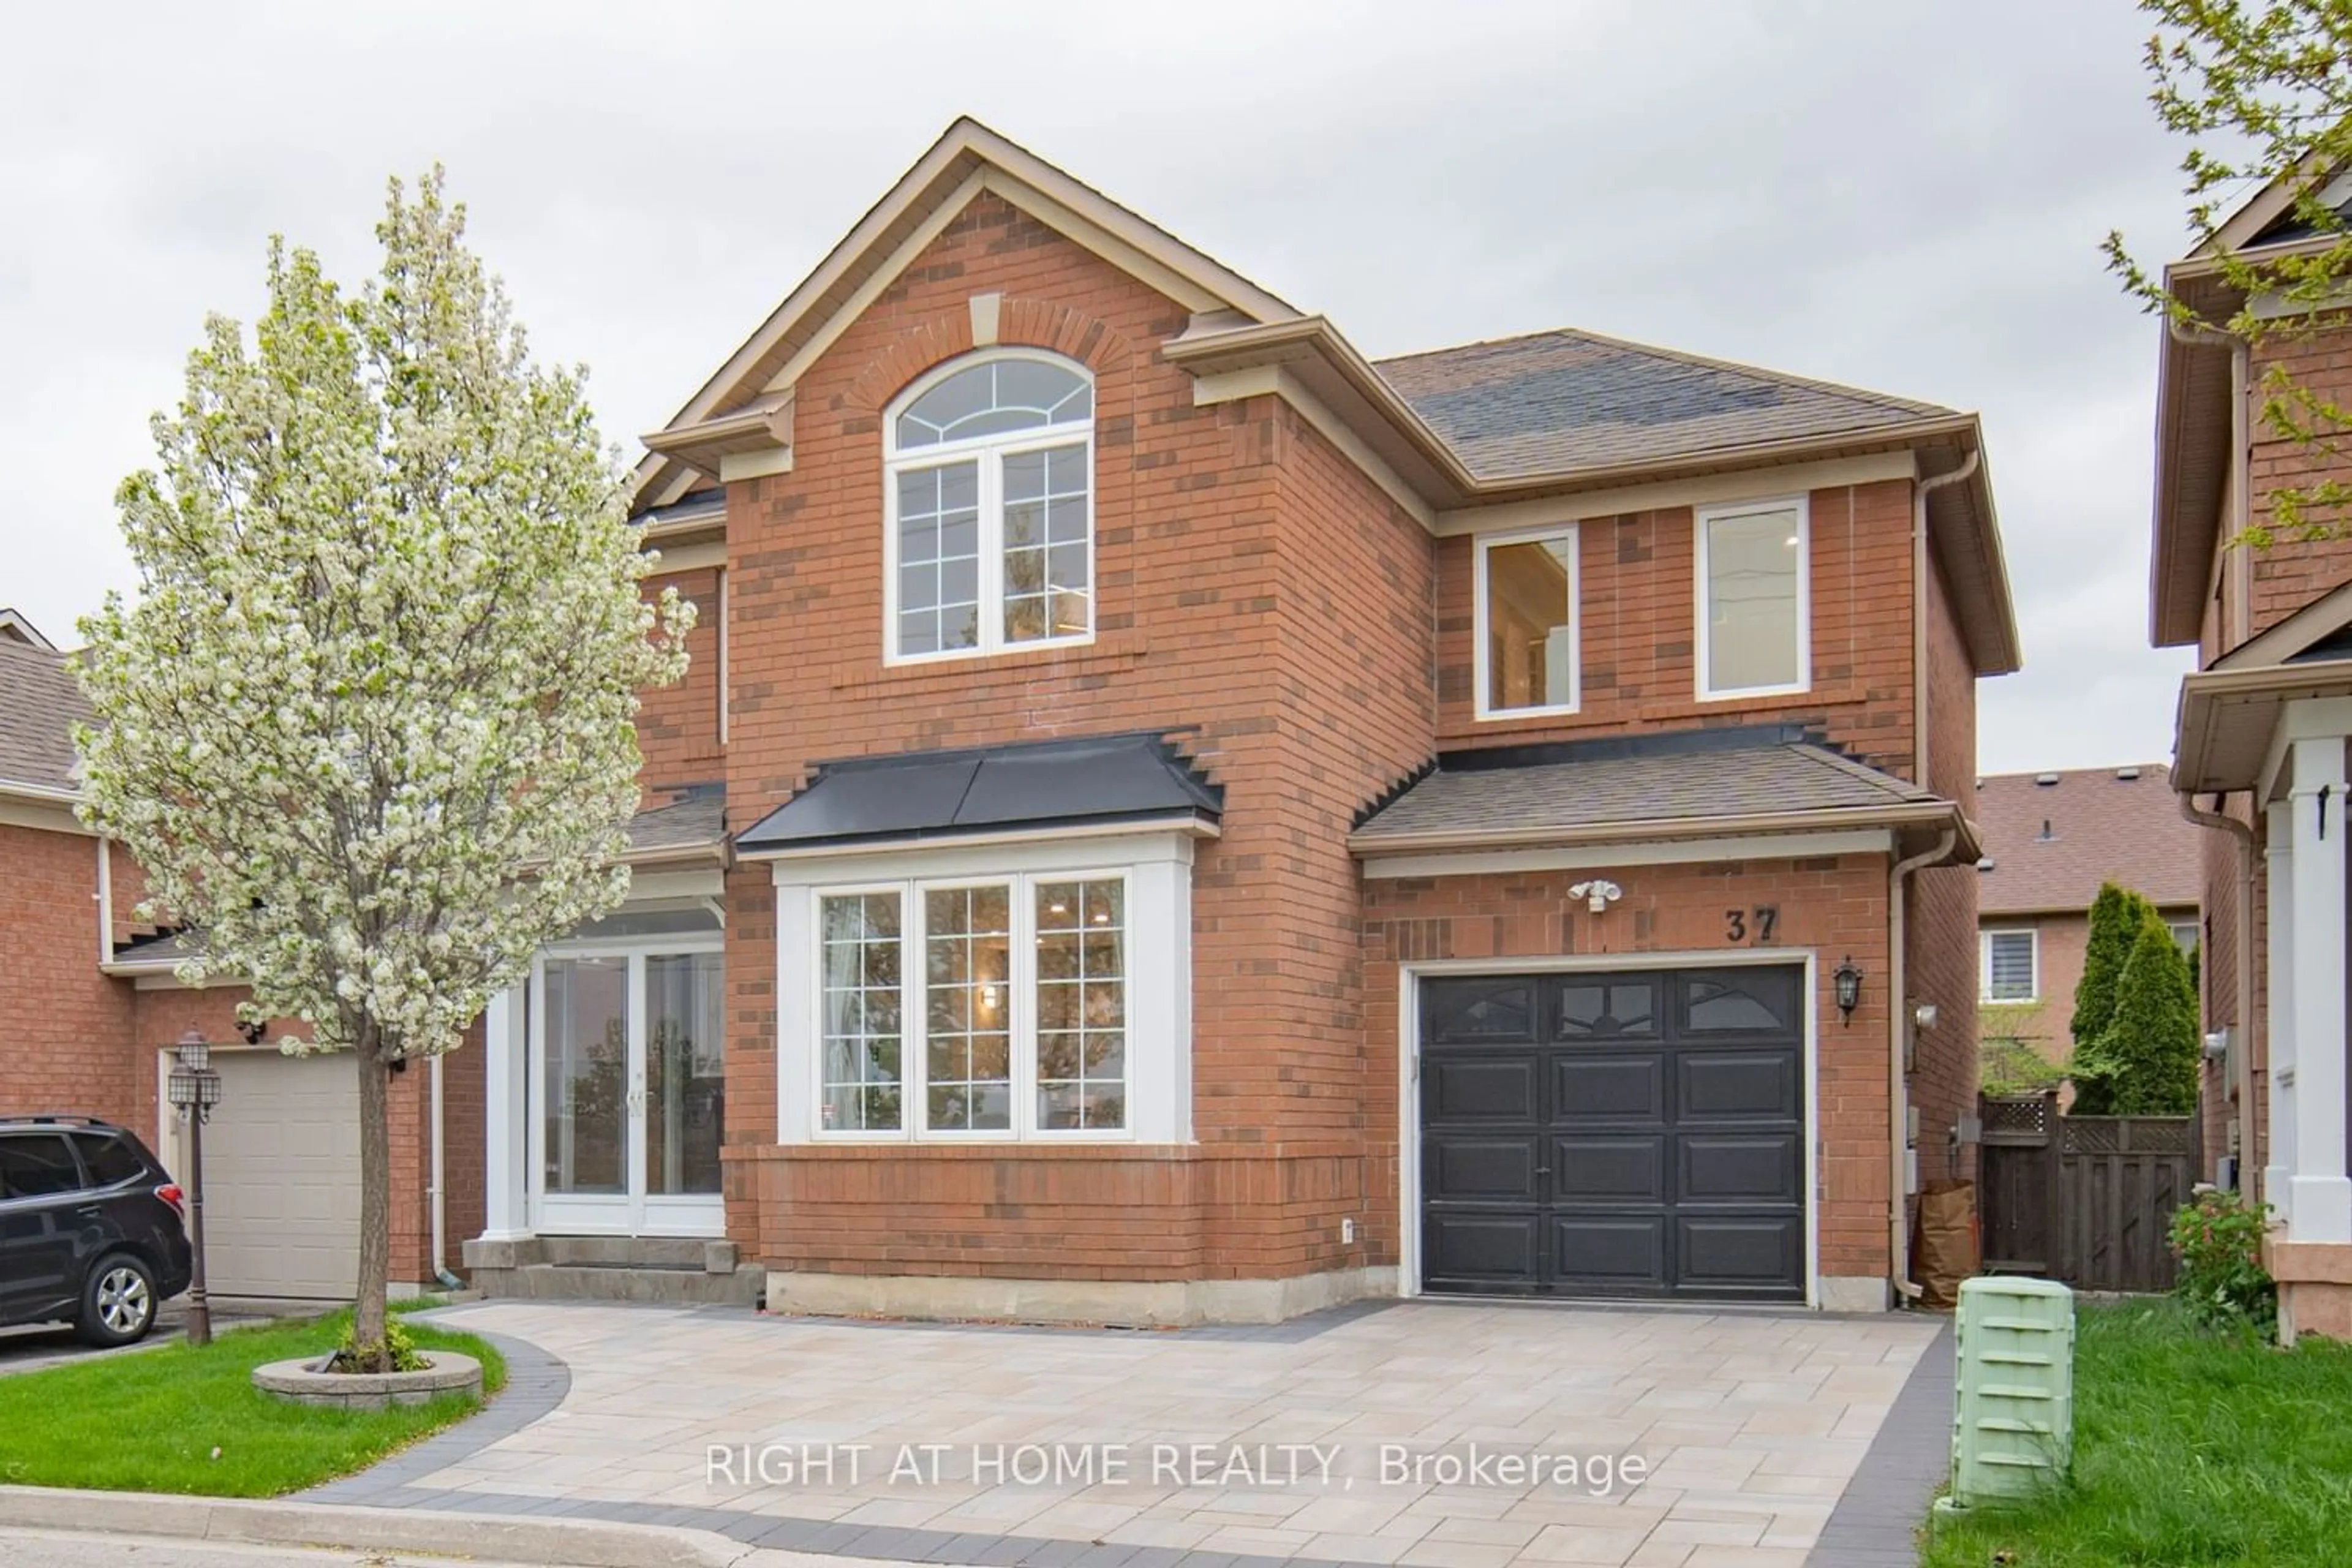 Home with brick exterior material for 37 Trojan Cres, Markham Ontario L6C 2G5